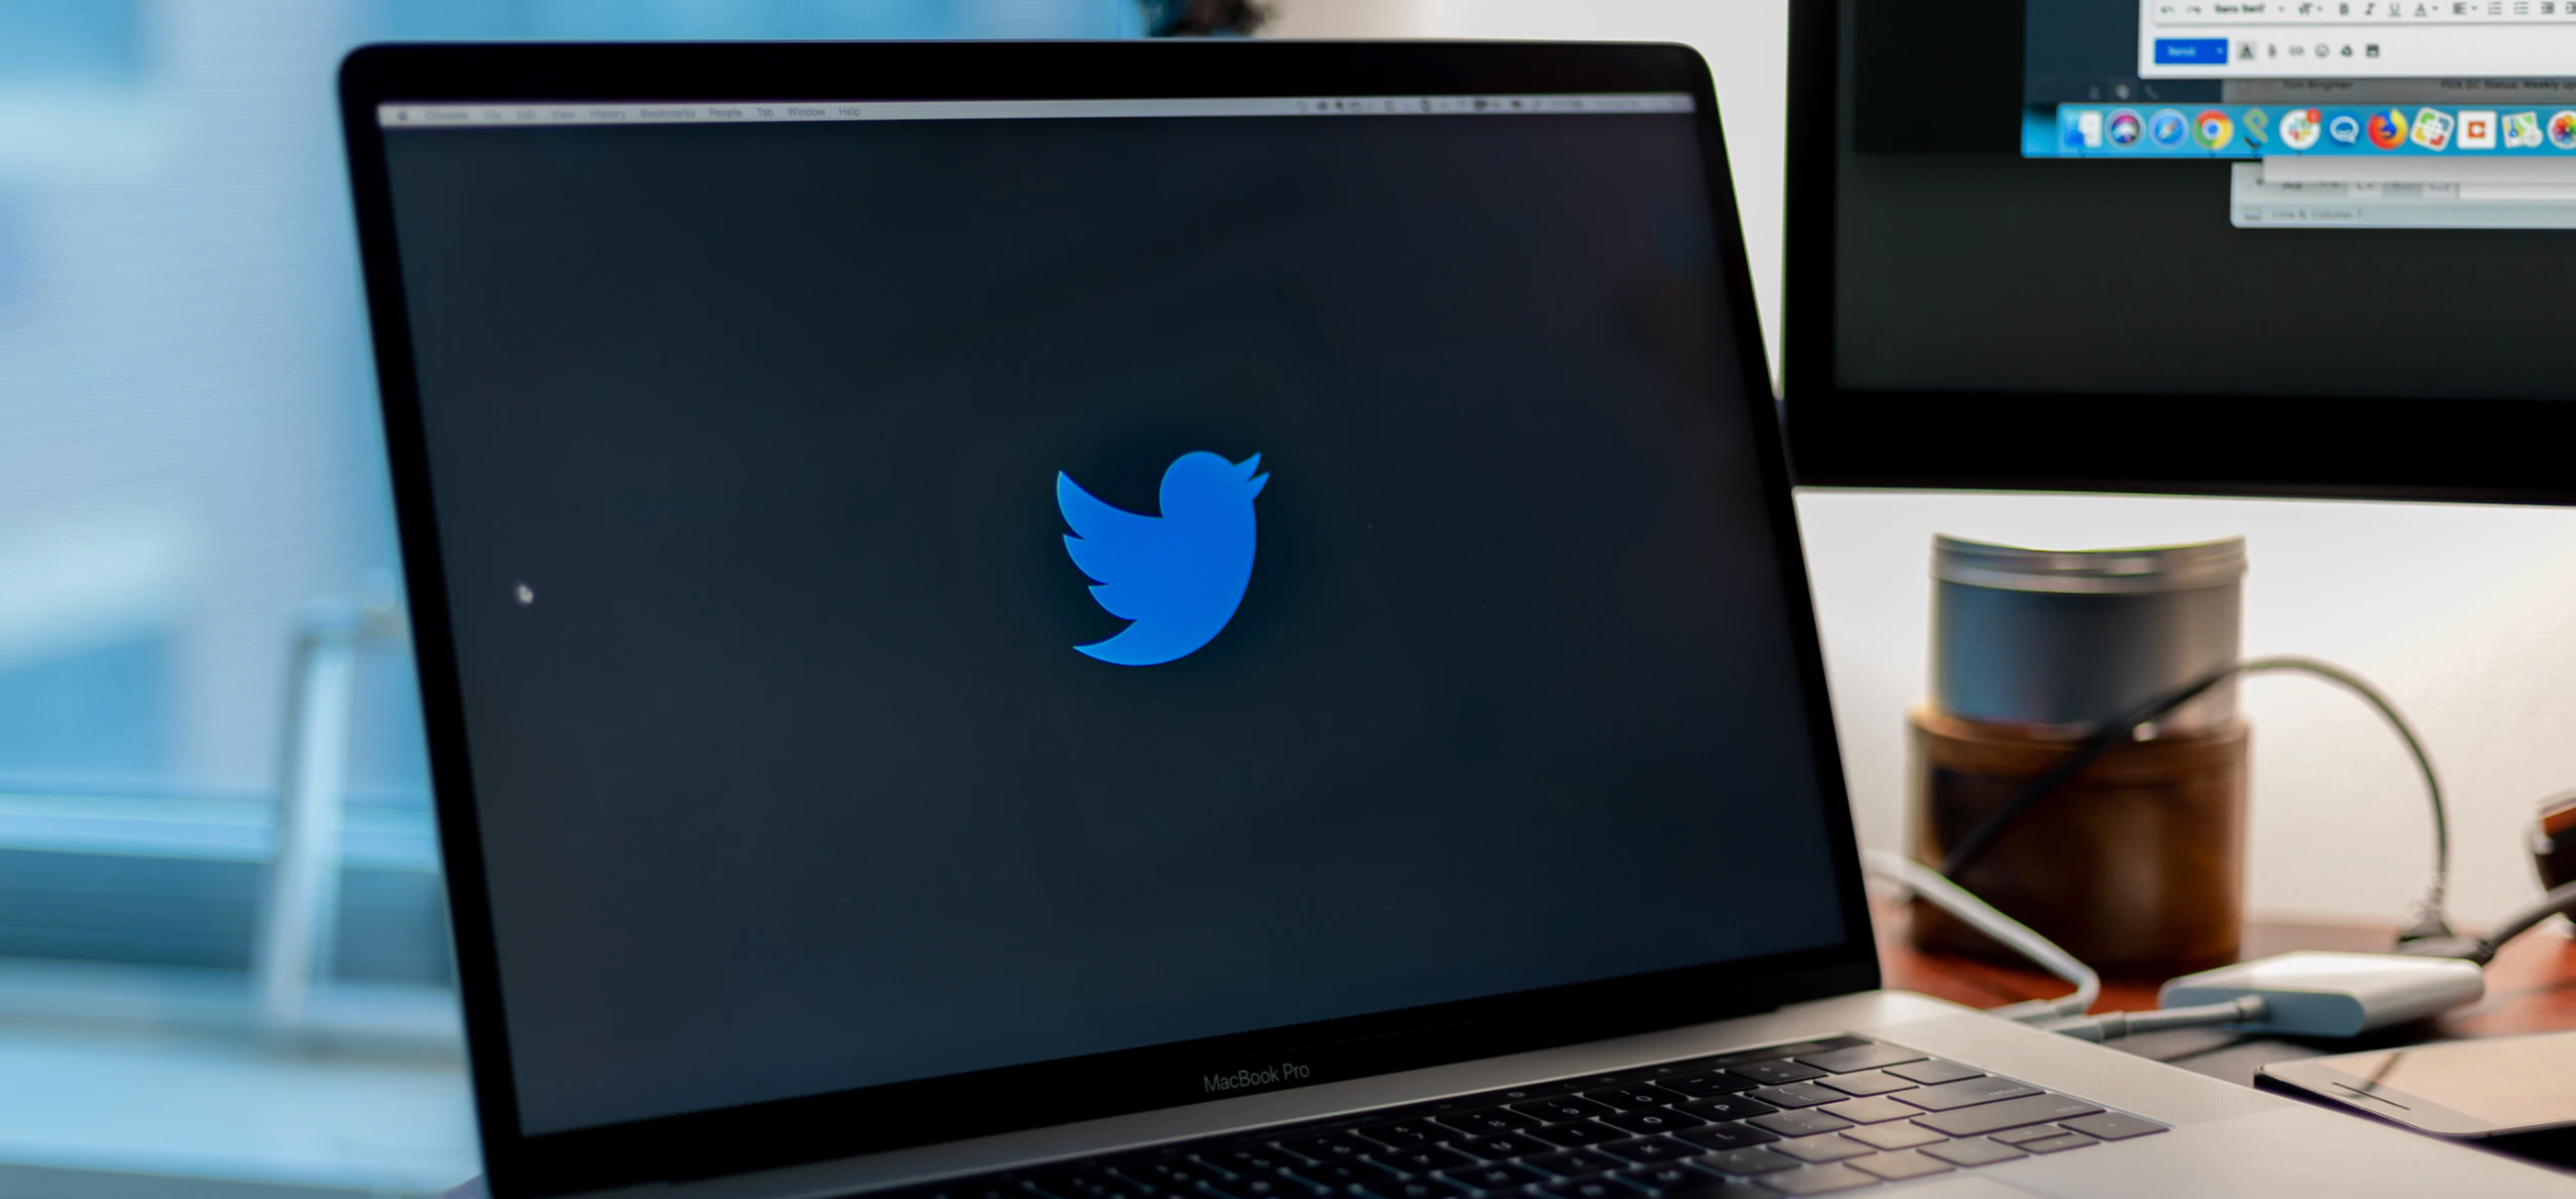 Twitter Insider Was Allegedly Responsible For The Biggest Hacking Incident: Report